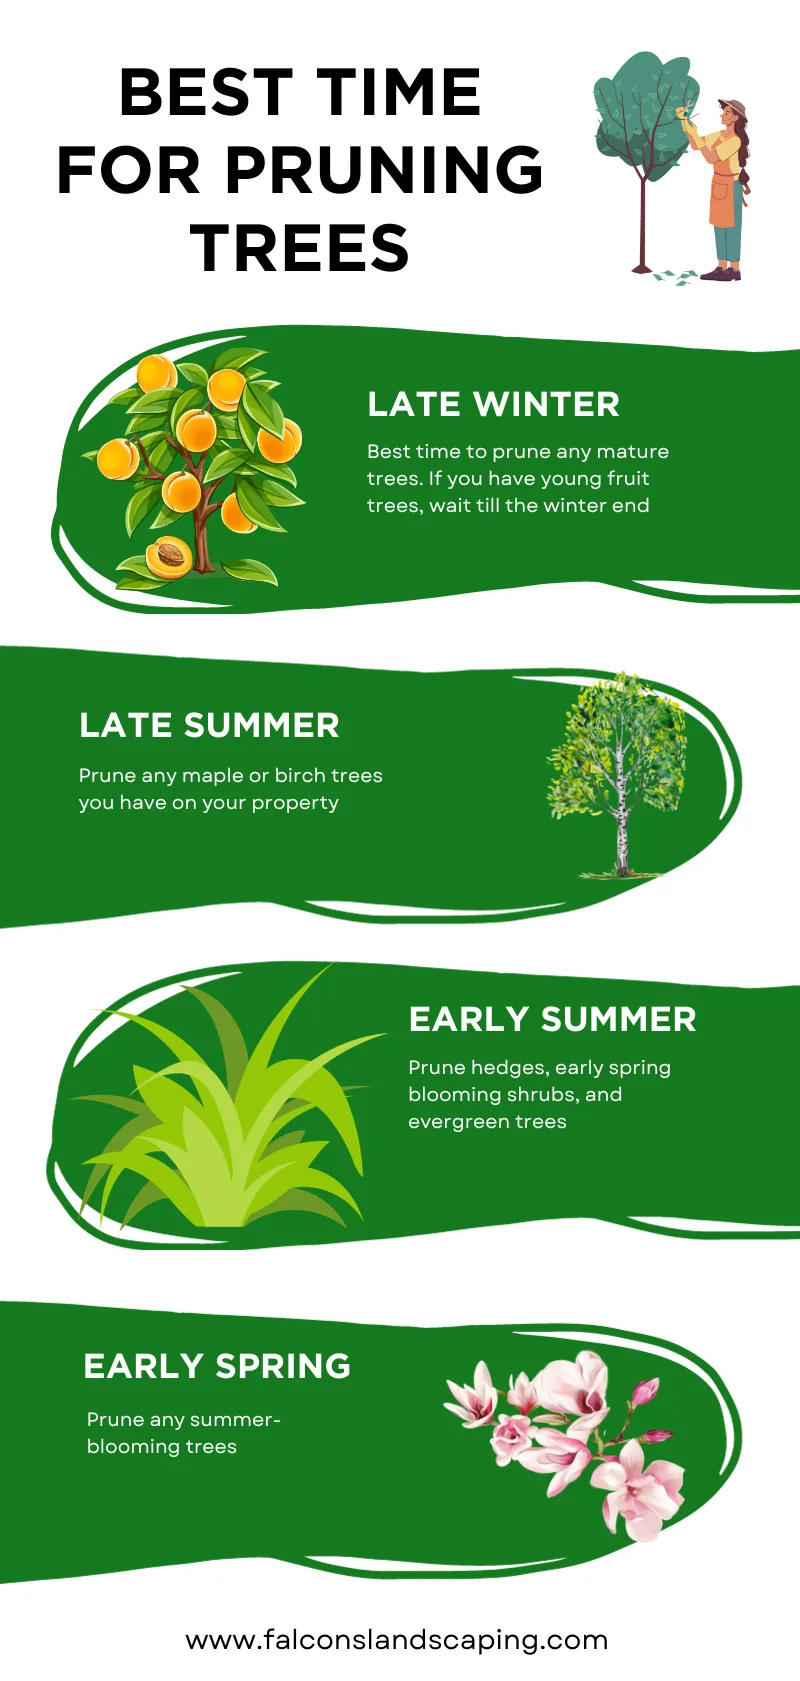 A chart explaining the best time for pruning trees